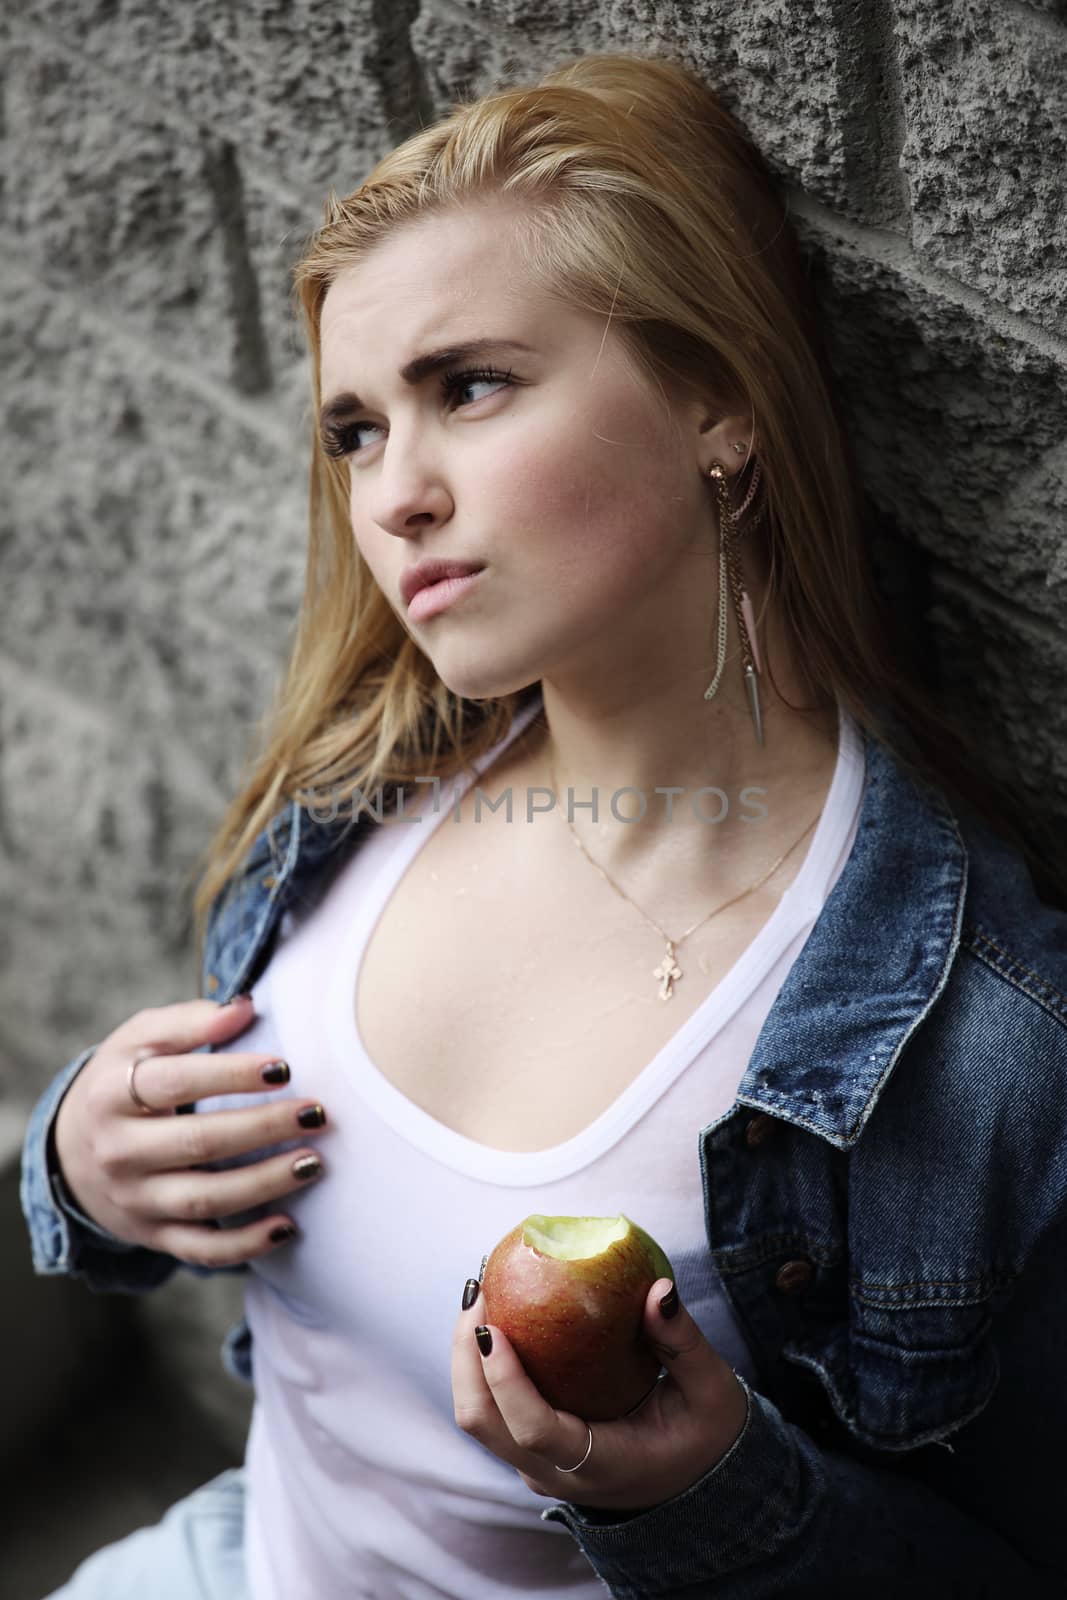 Urban style portrait of young beautiful blond woman in denim with apple